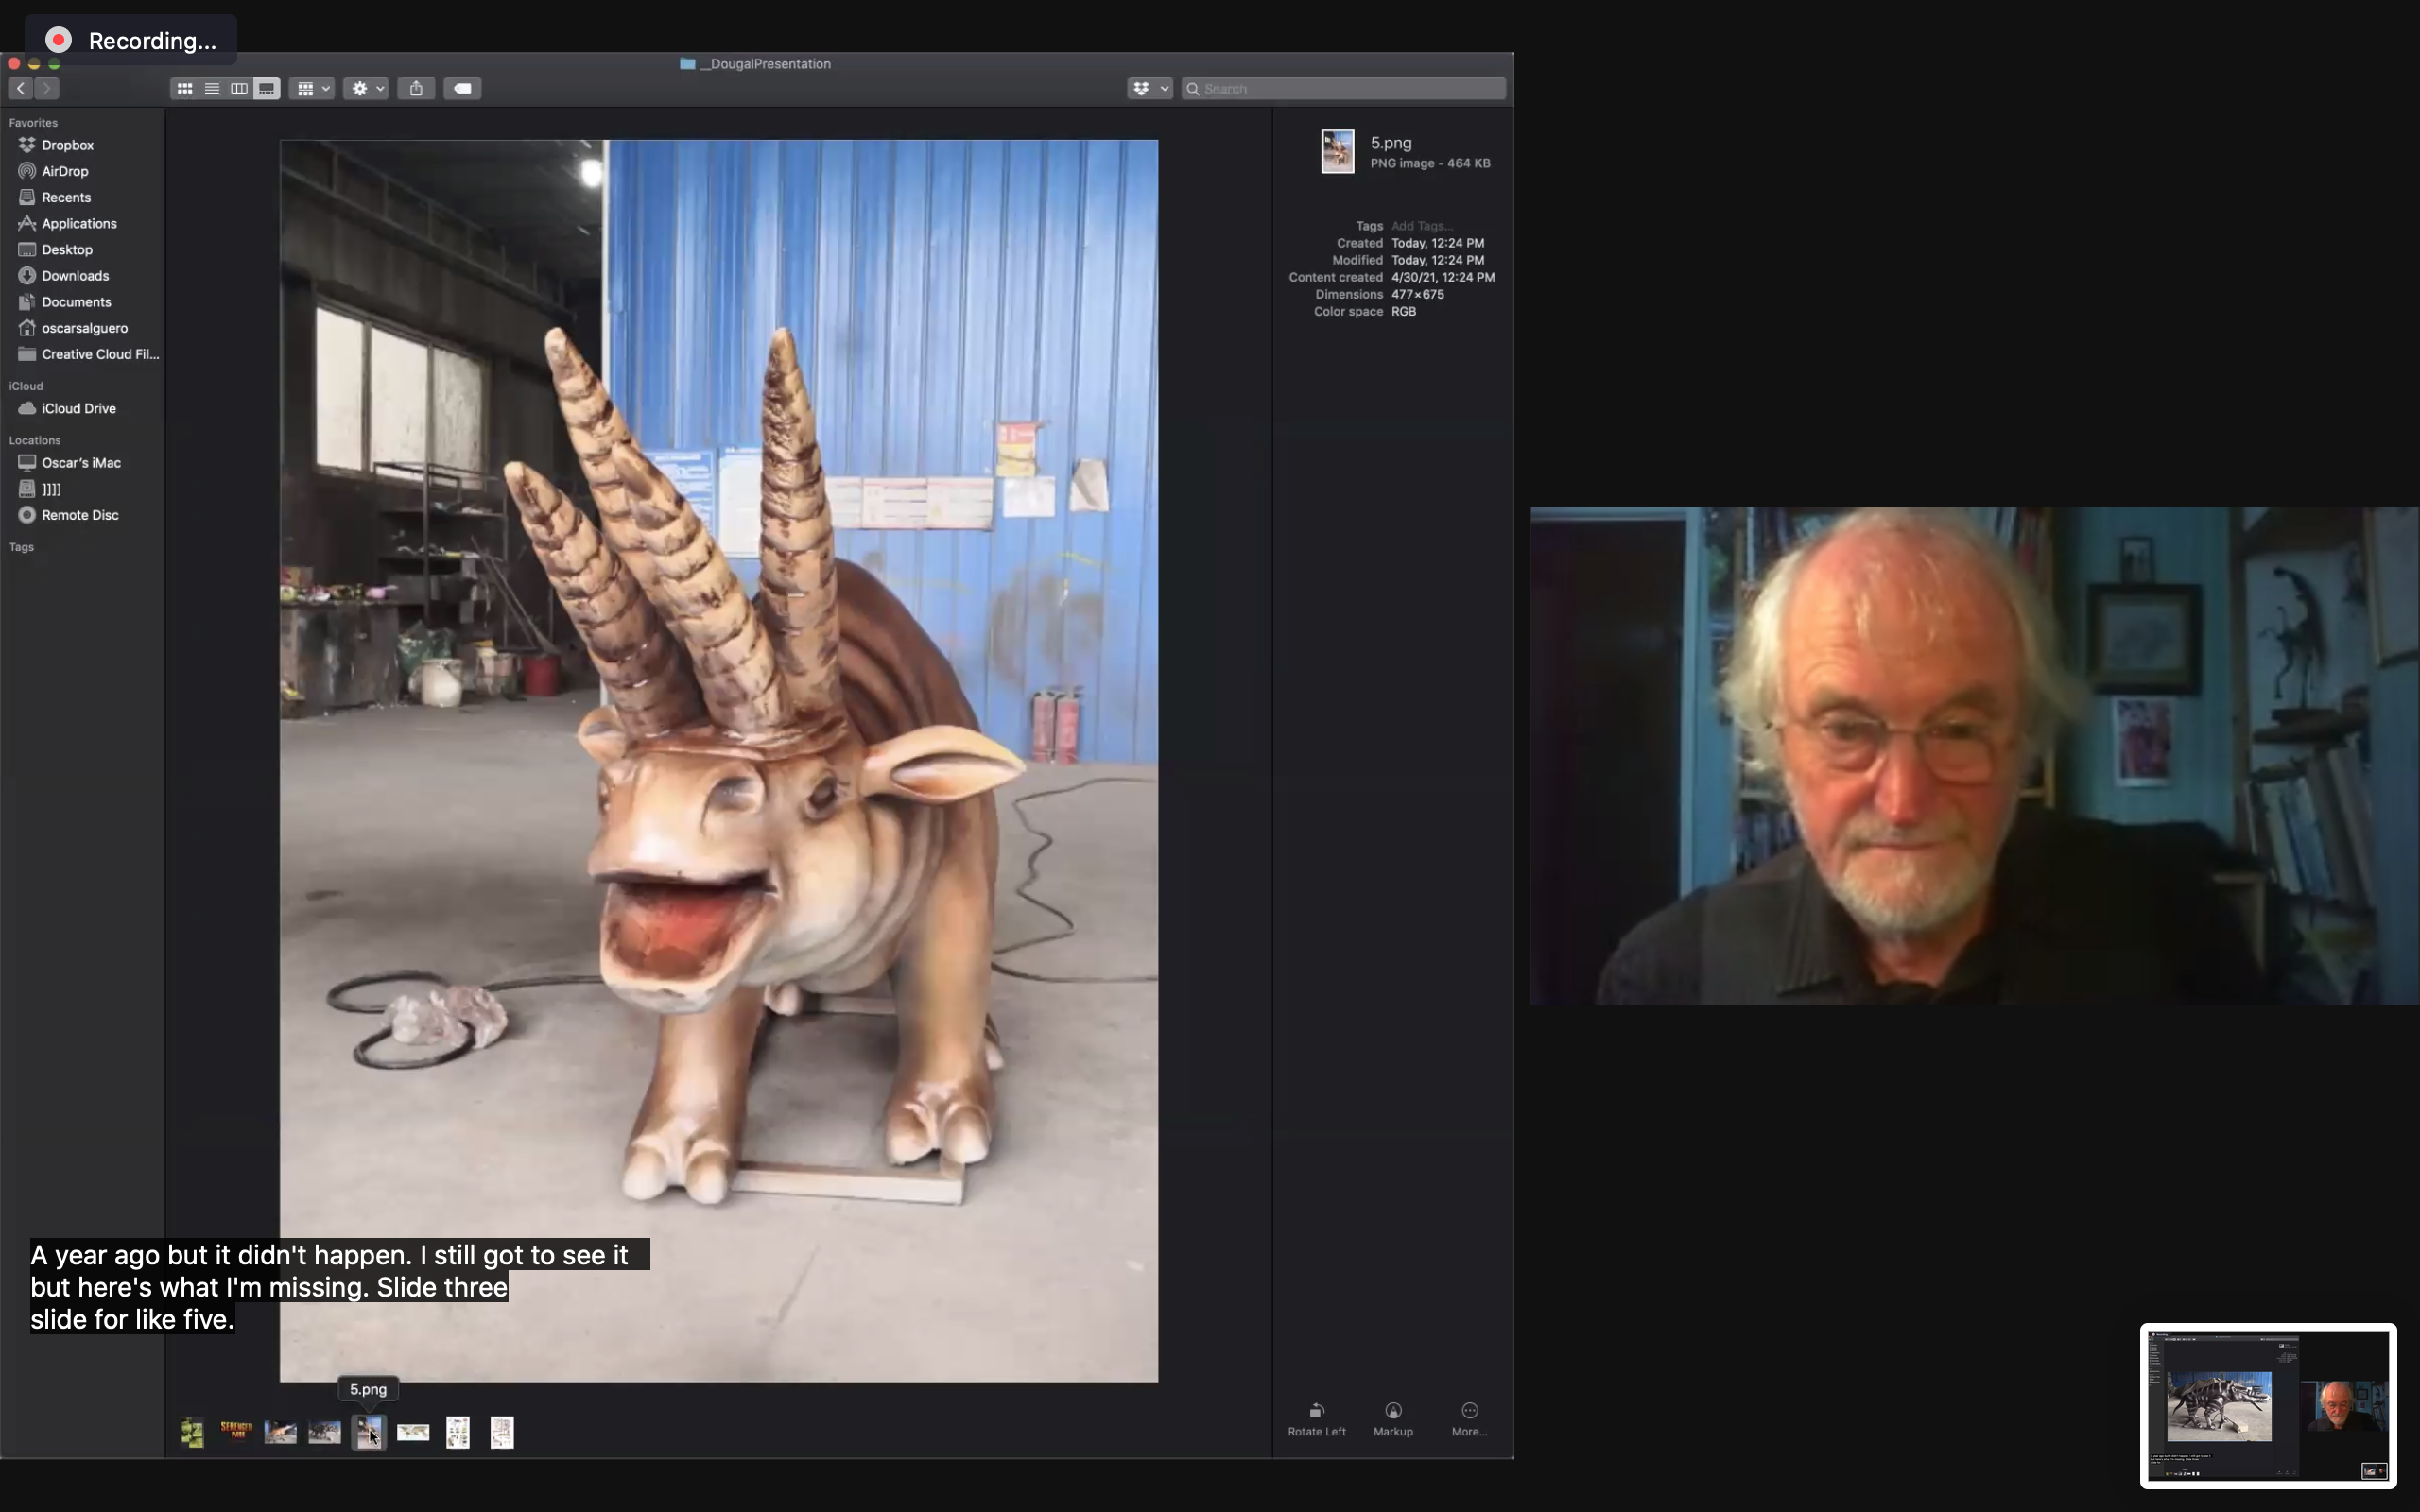 Screen Capture of Dougal Dixon and an image of a speculative species